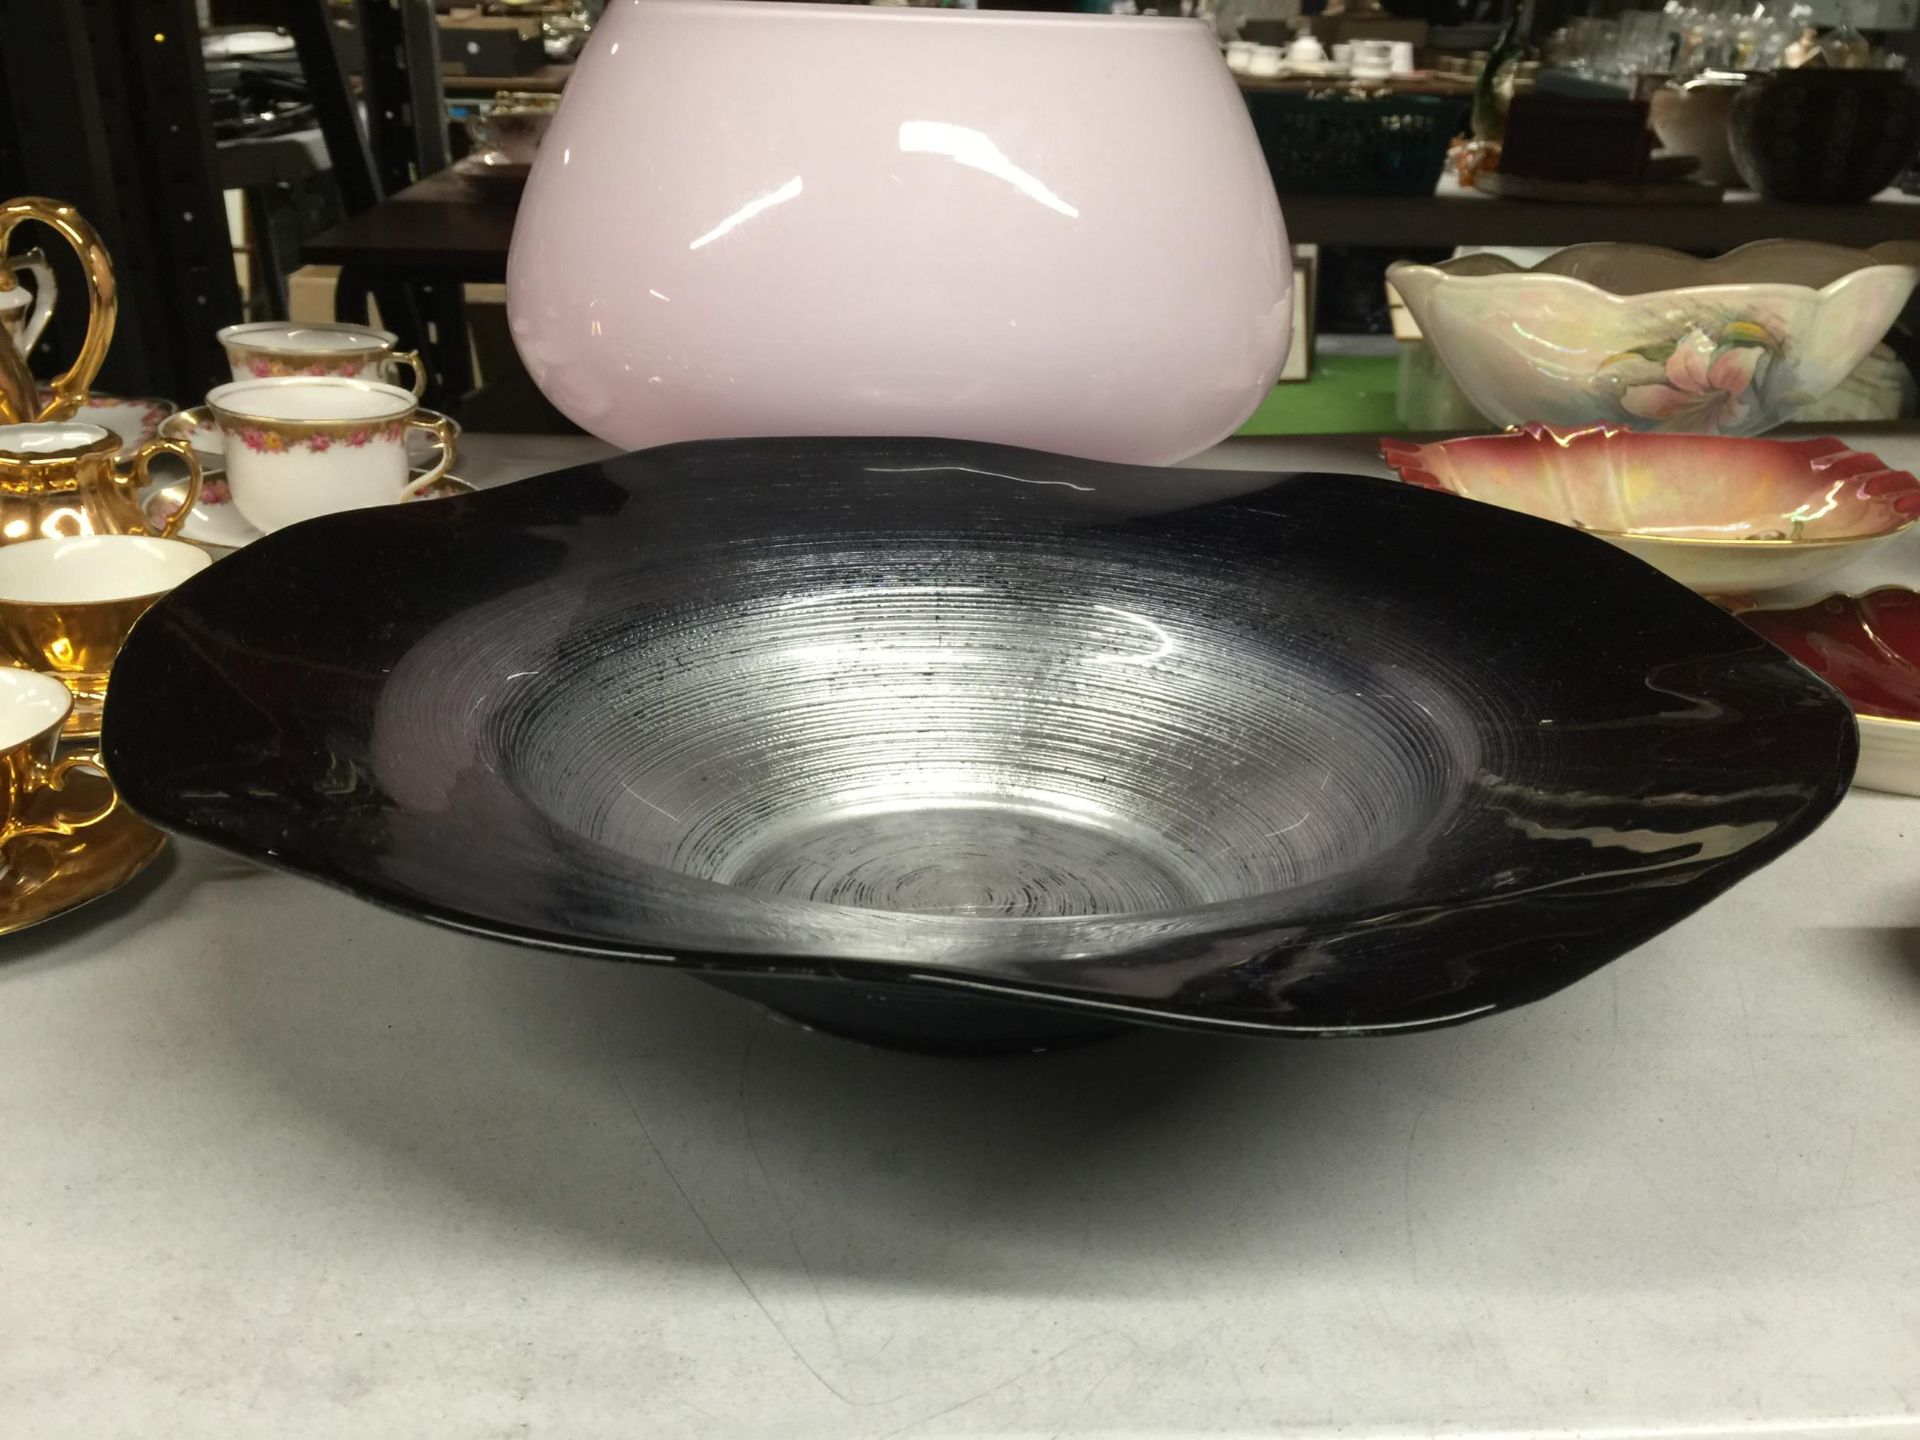 A LARGE PINK GLASS BOWL PLUS A LARGE BLACK AND SILVER BOWL - Image 2 of 3